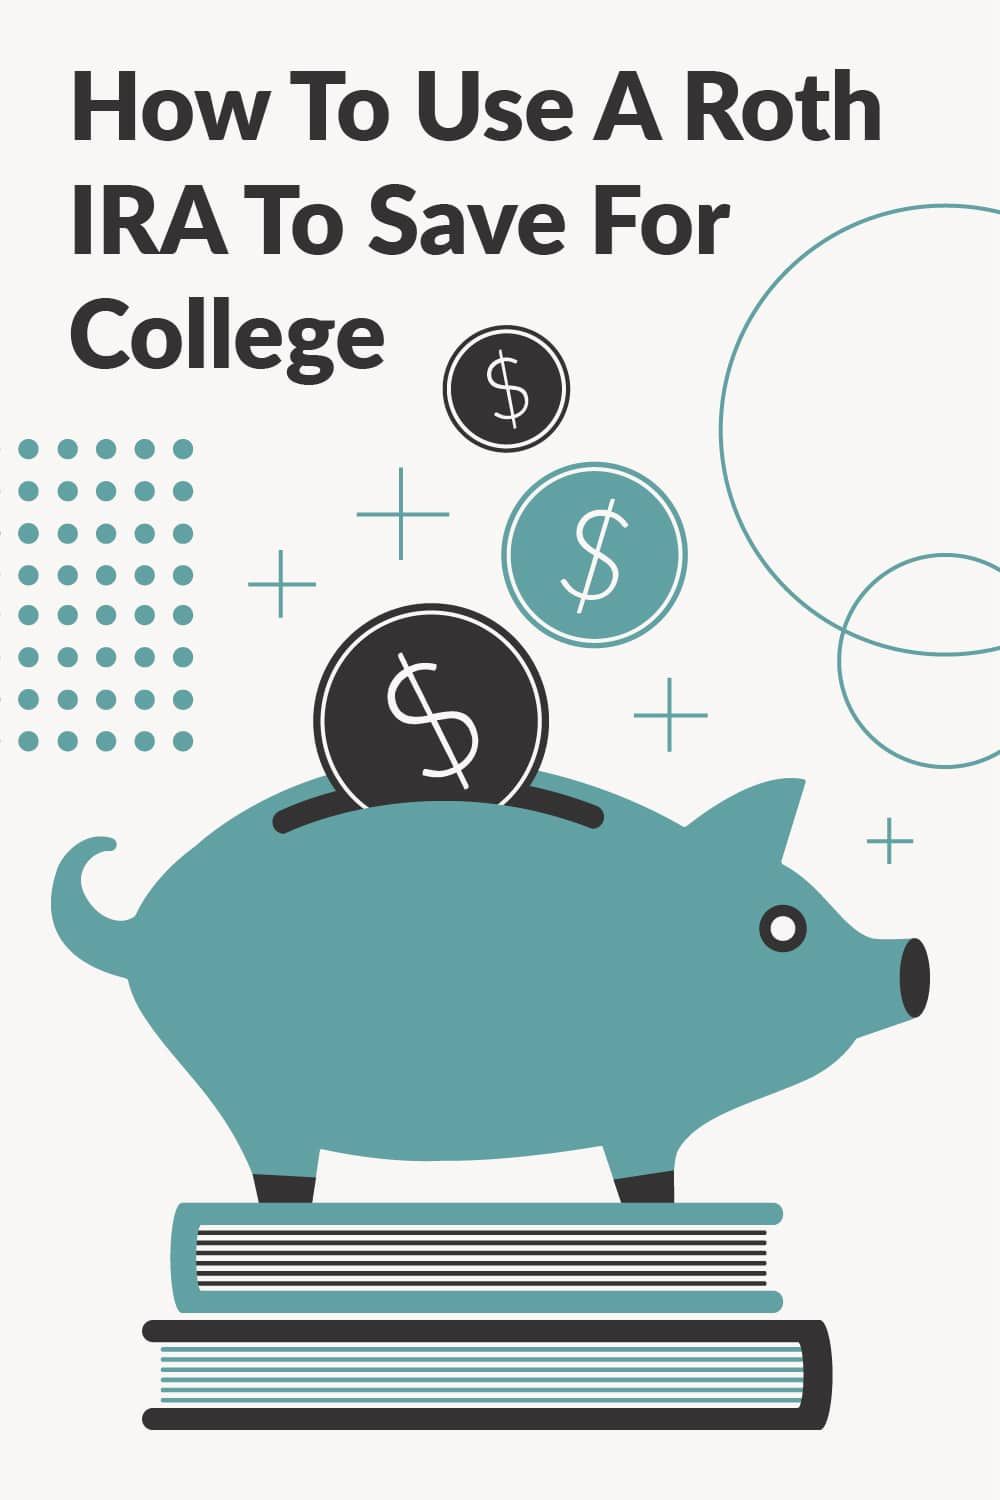 How To Use A Roth IRA To Save For College